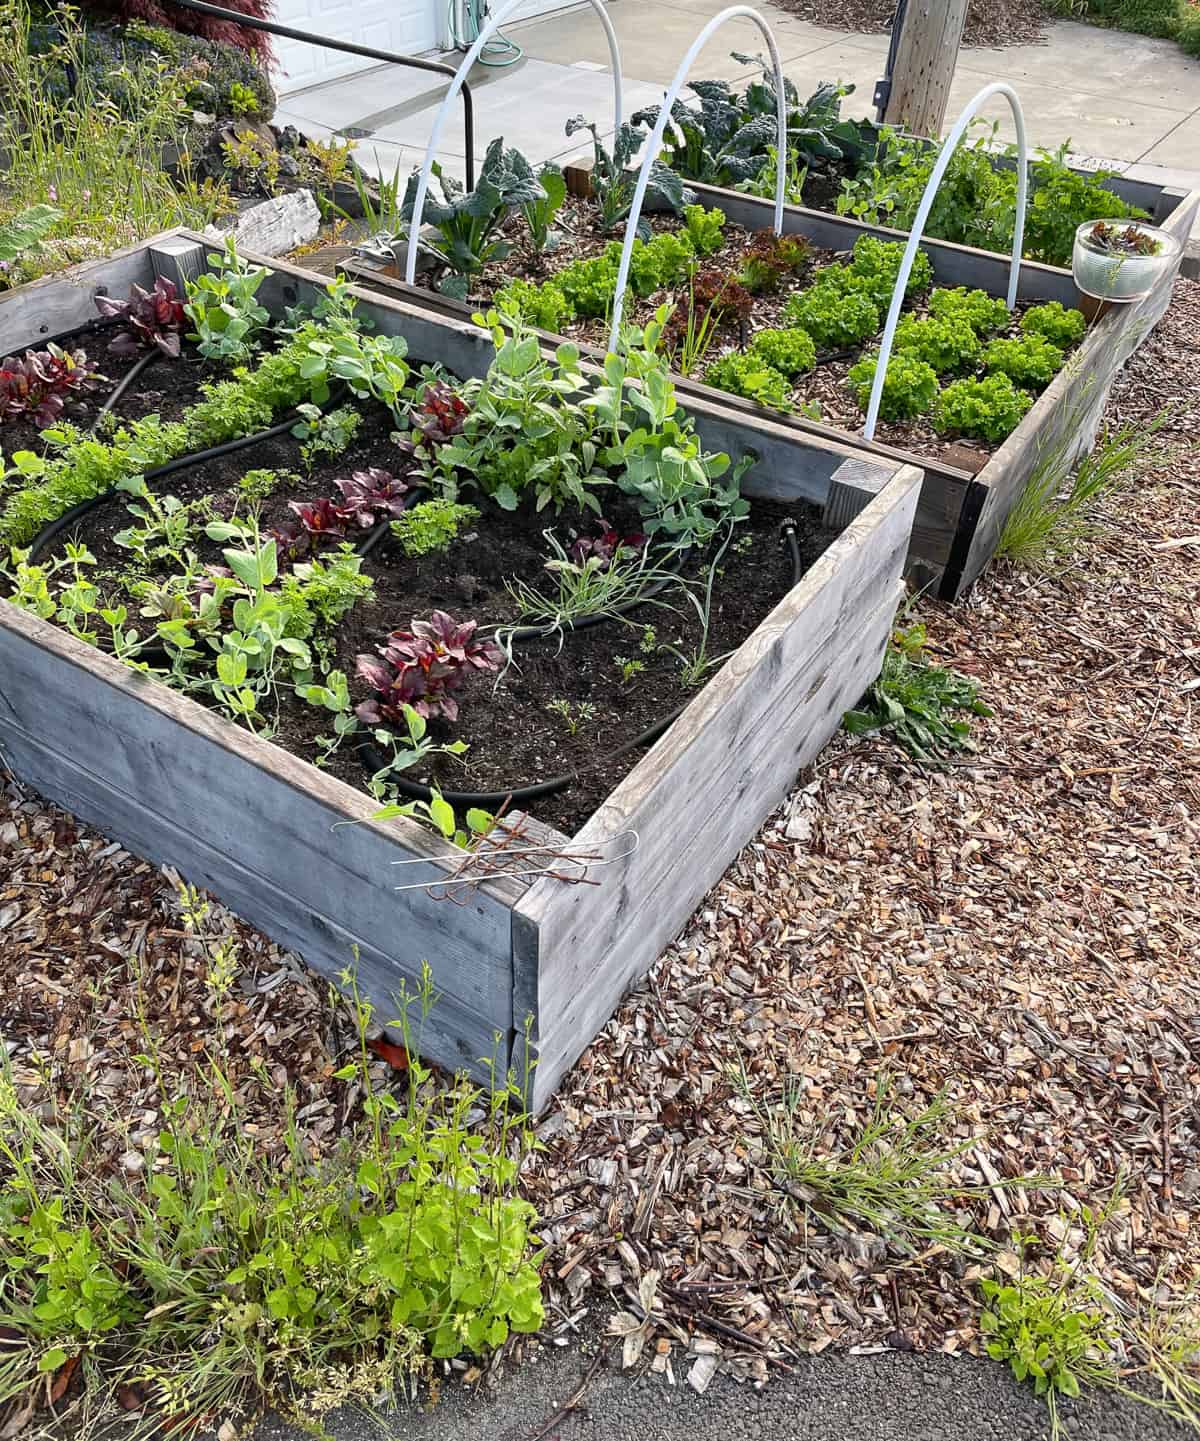 3 garden beds with plants in them.